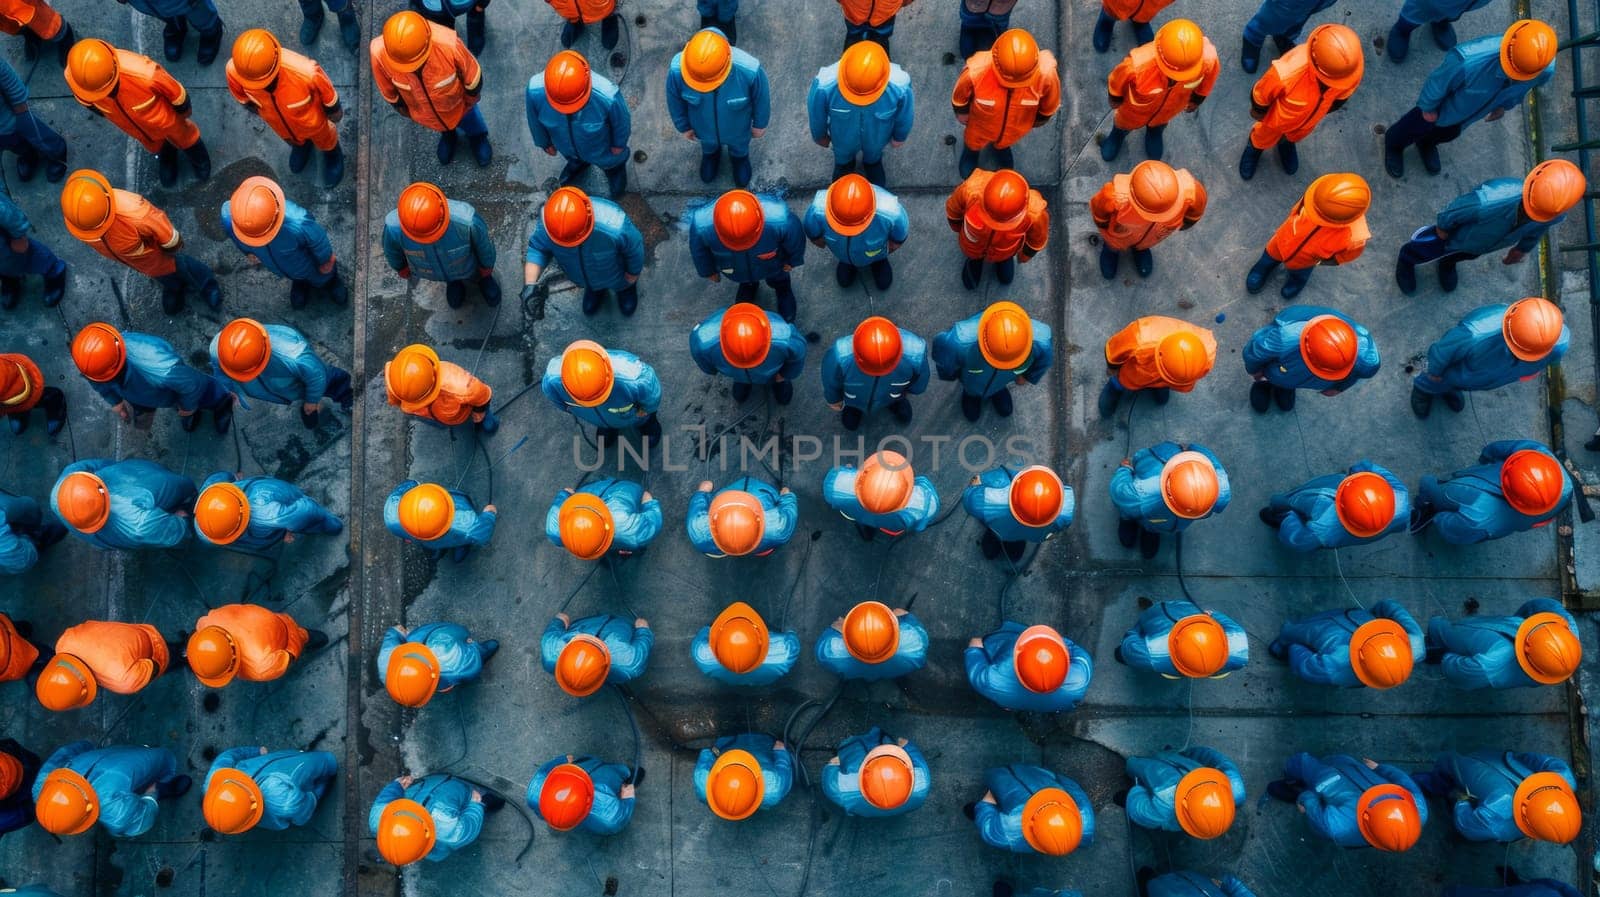 A group of people wearing orange hard hats are standing in a line